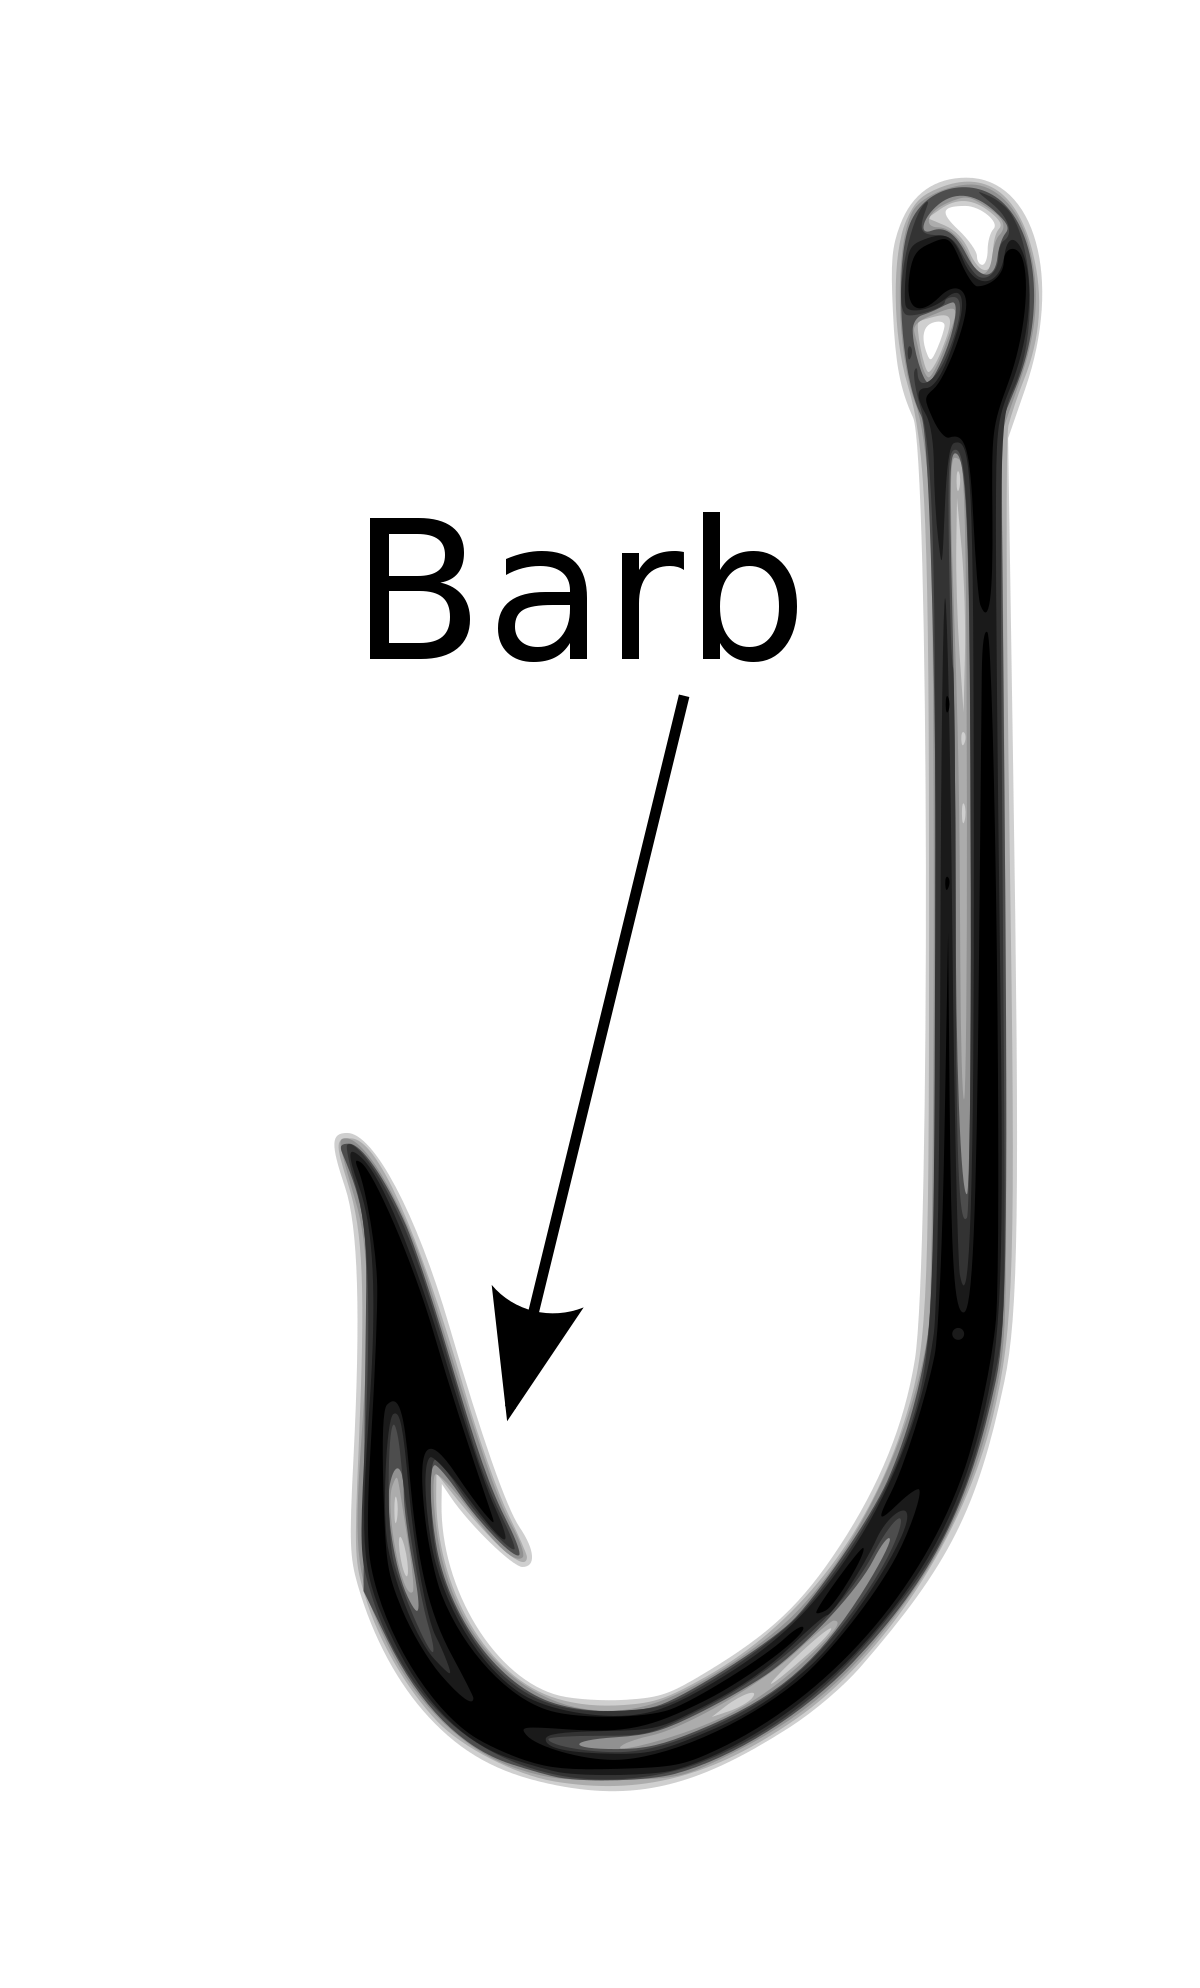 hook clipart barbed